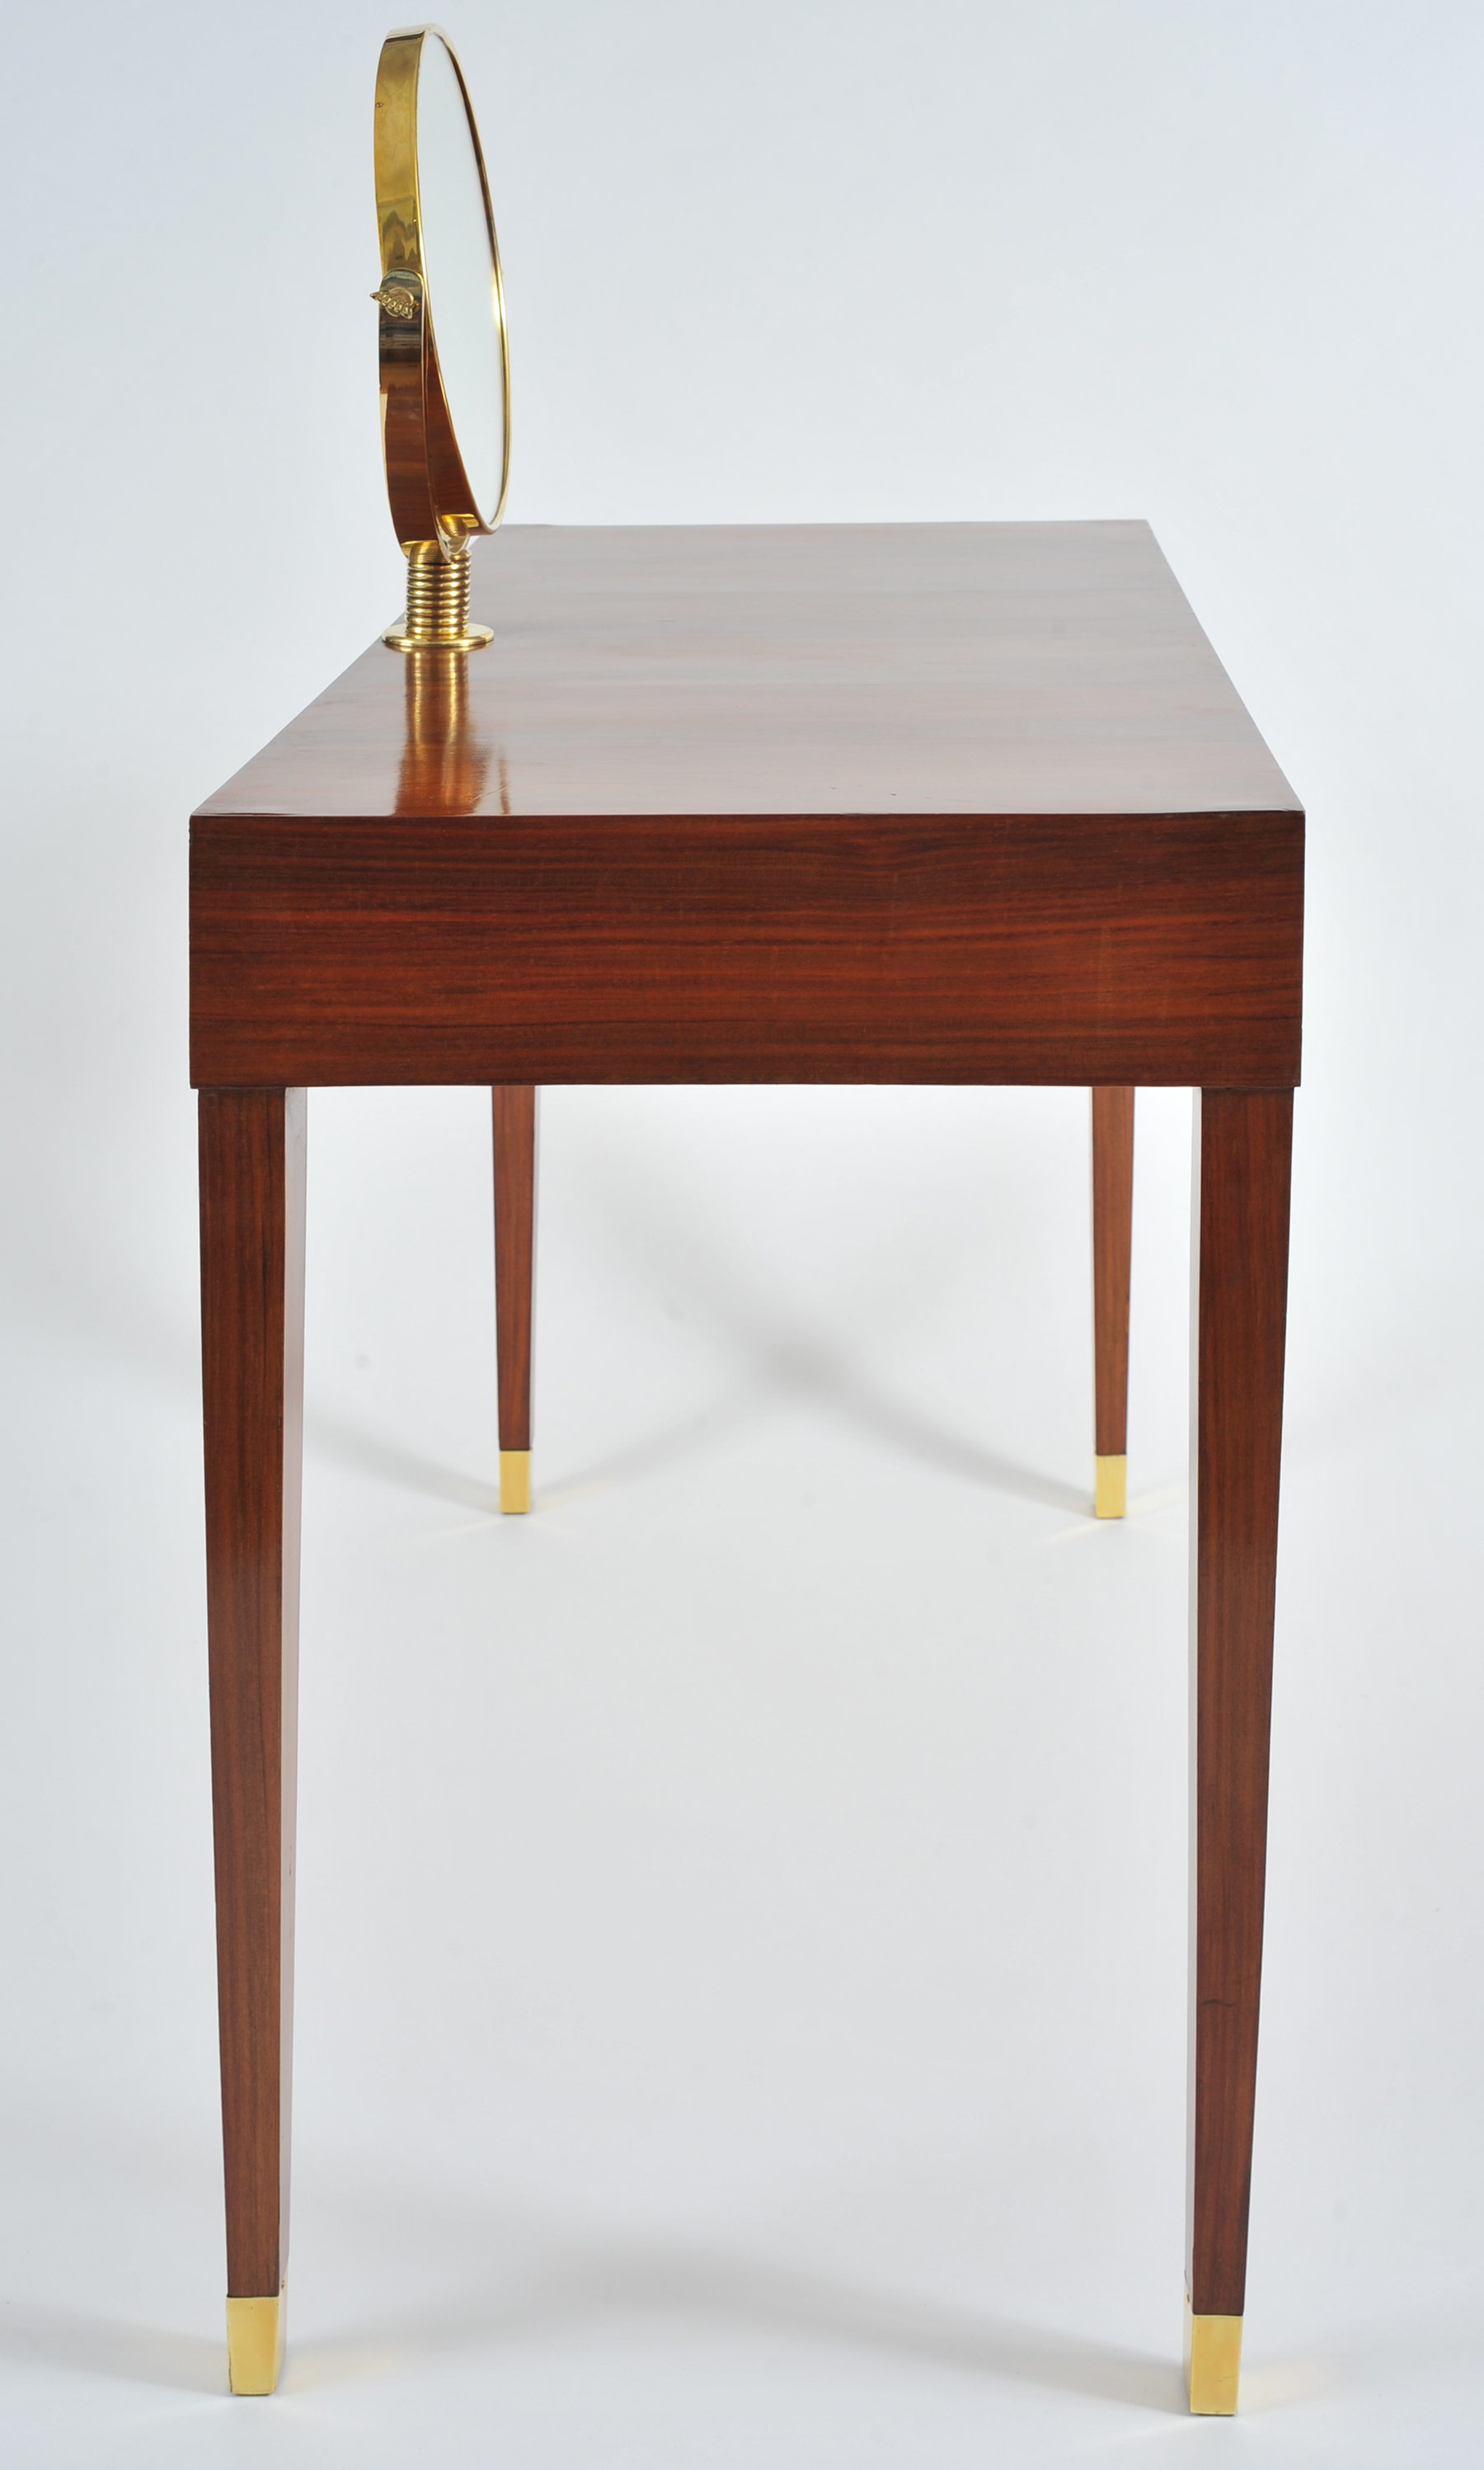 The image for Valerie Wade Fd645 Fruitwood Dressing Table Iii